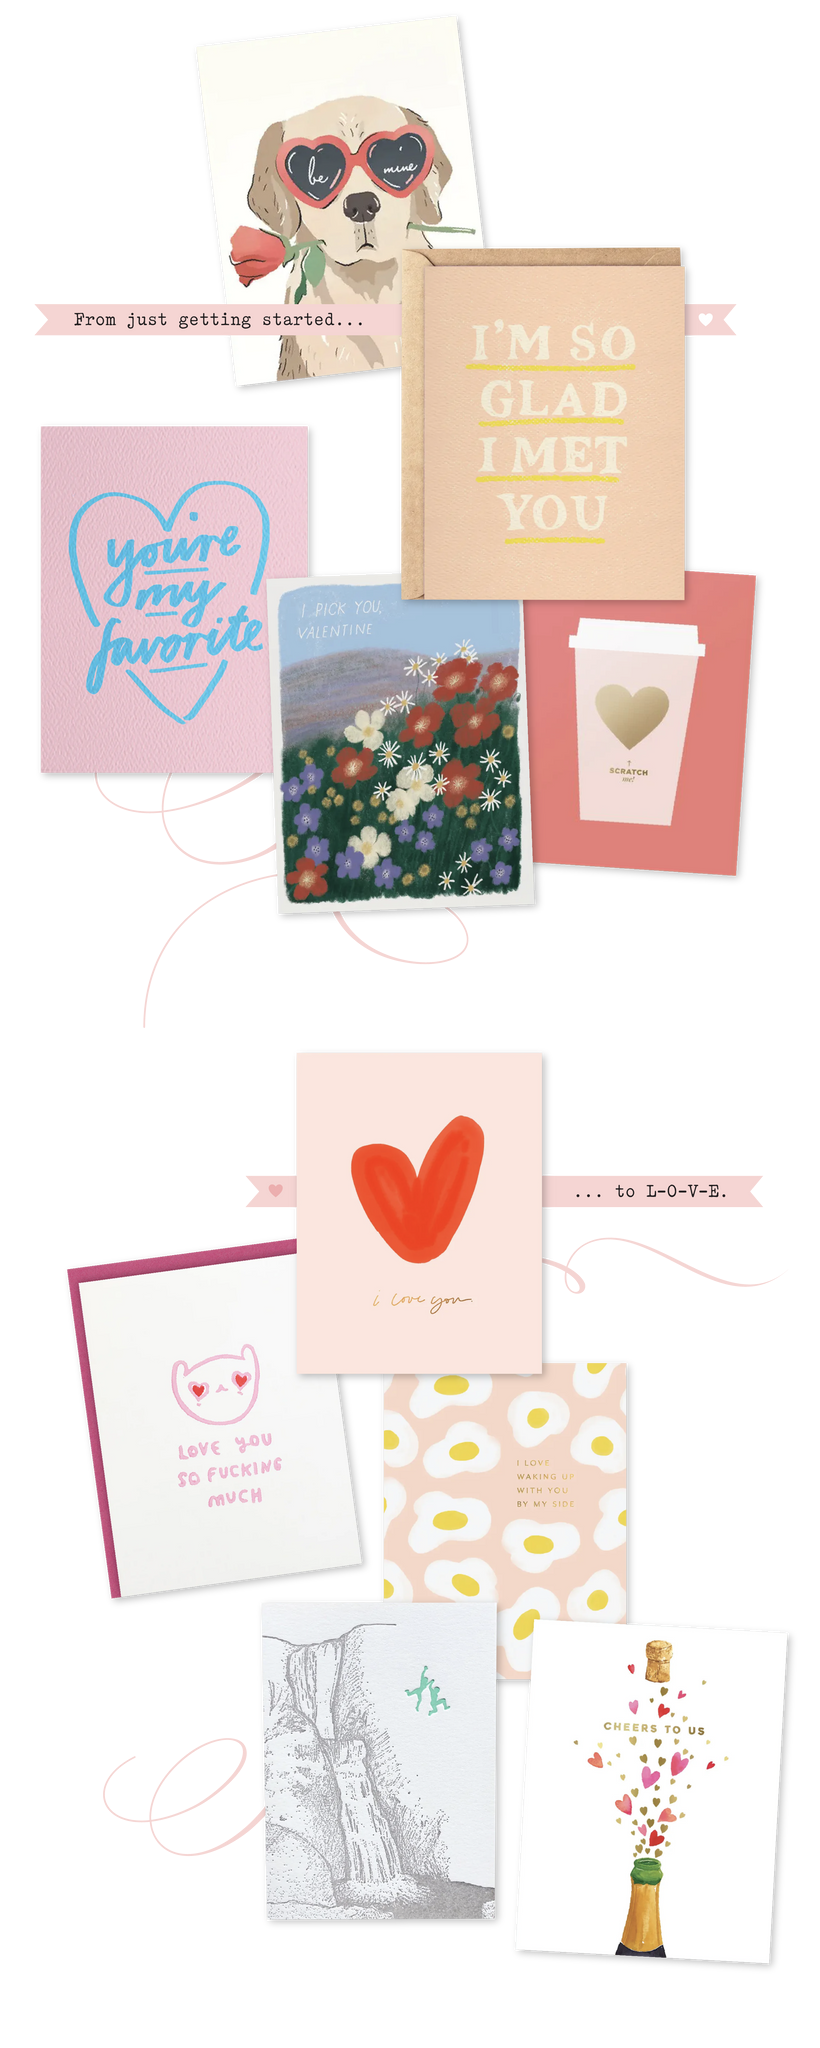 urbanic paper boutique los angeles california gifts stationery greeting cards valentines galentines vday love friendship romance heart rose dog flowers coffee cat eggs champagne jump